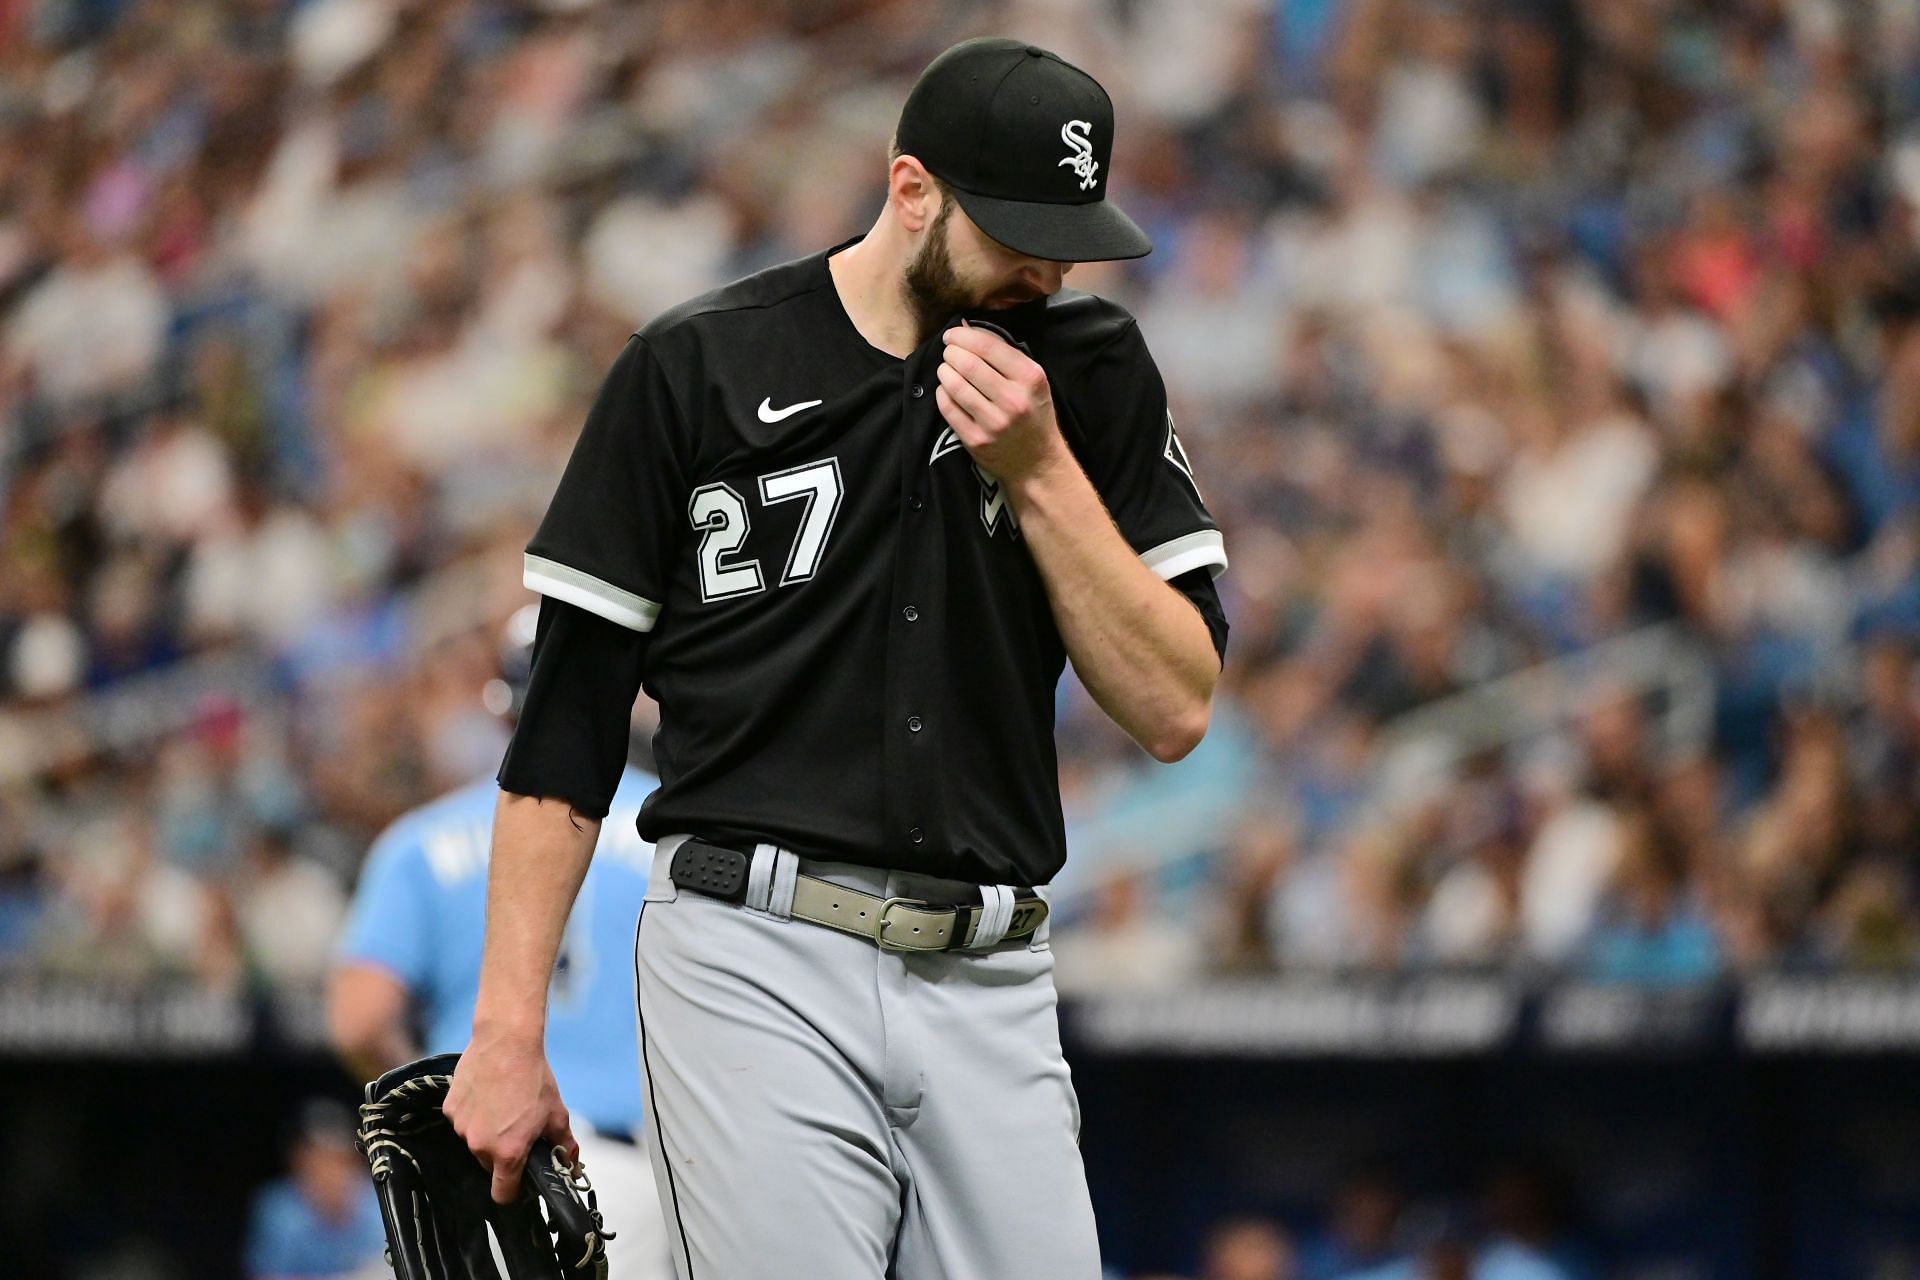 Grifol shoulders blame for White Sox's somber season: 'There's no